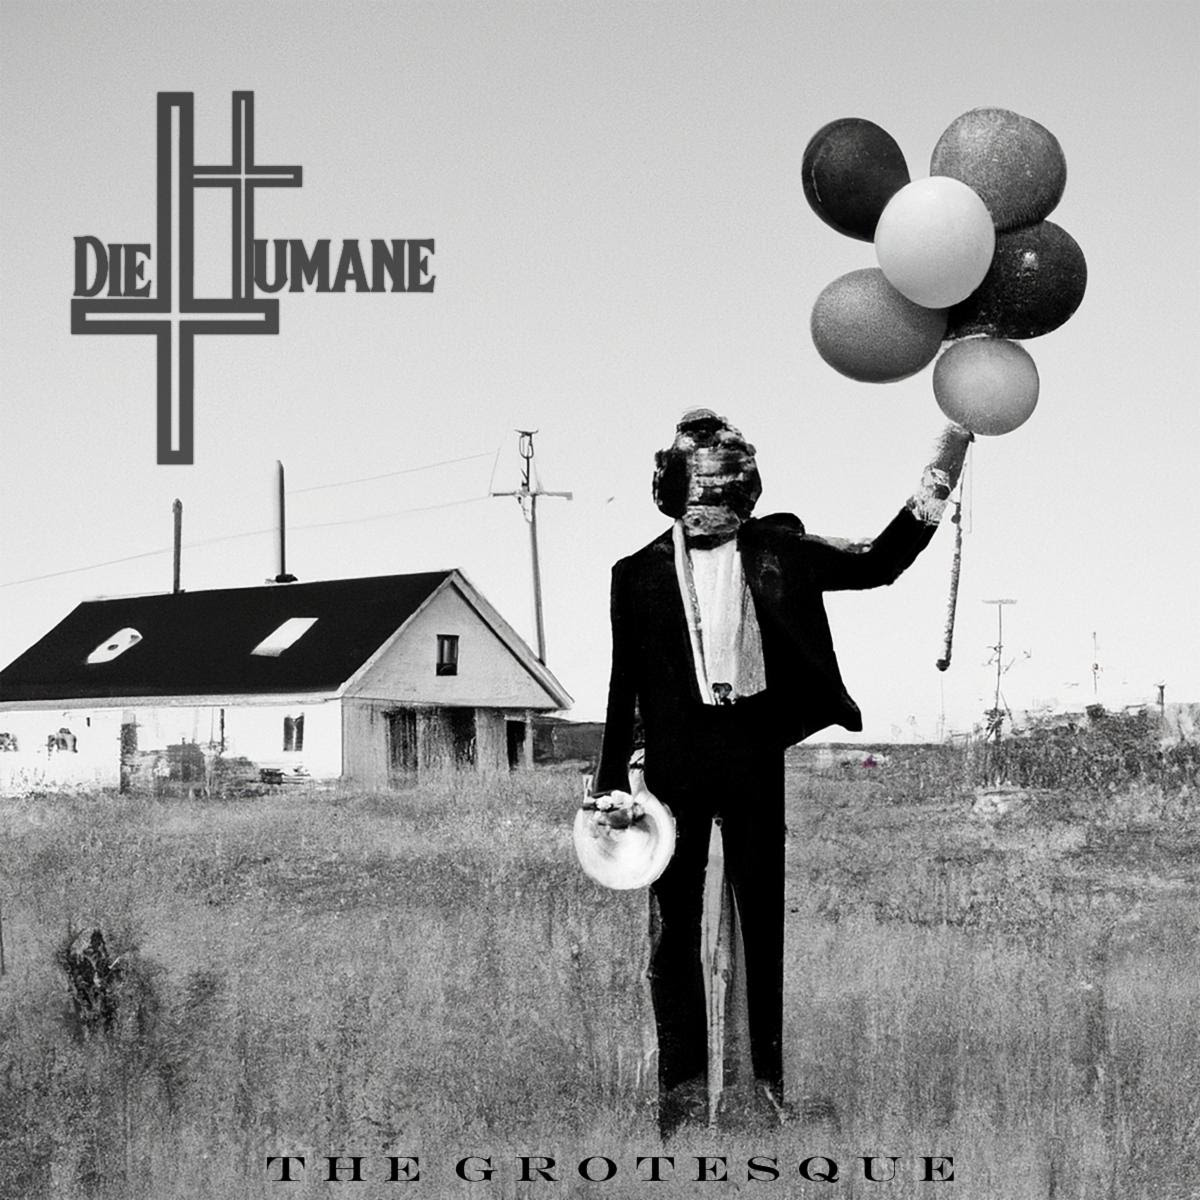 DieHumane  Streams Debut Album Exclusively  at Metal Injection Today